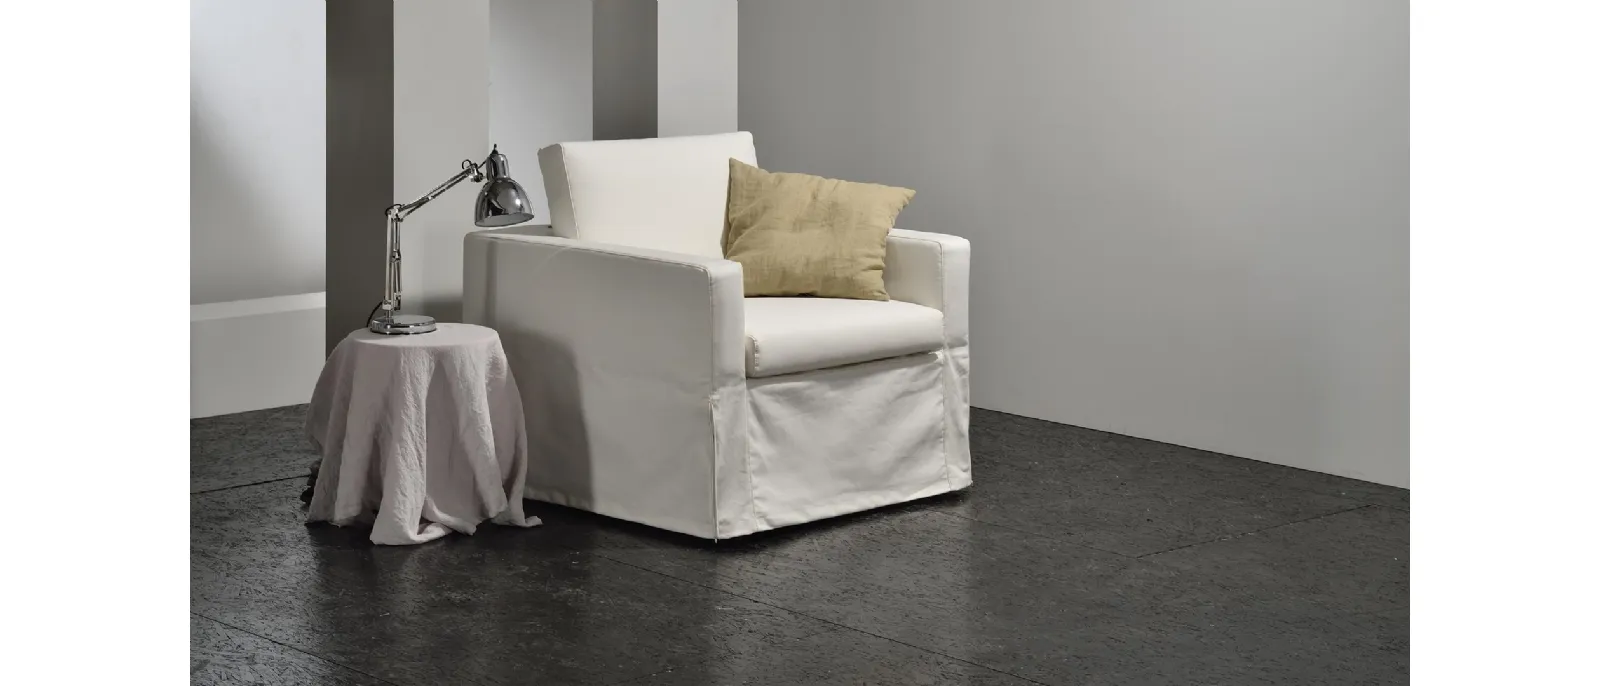 Moon armchair bed with removable cover by Family Bedding